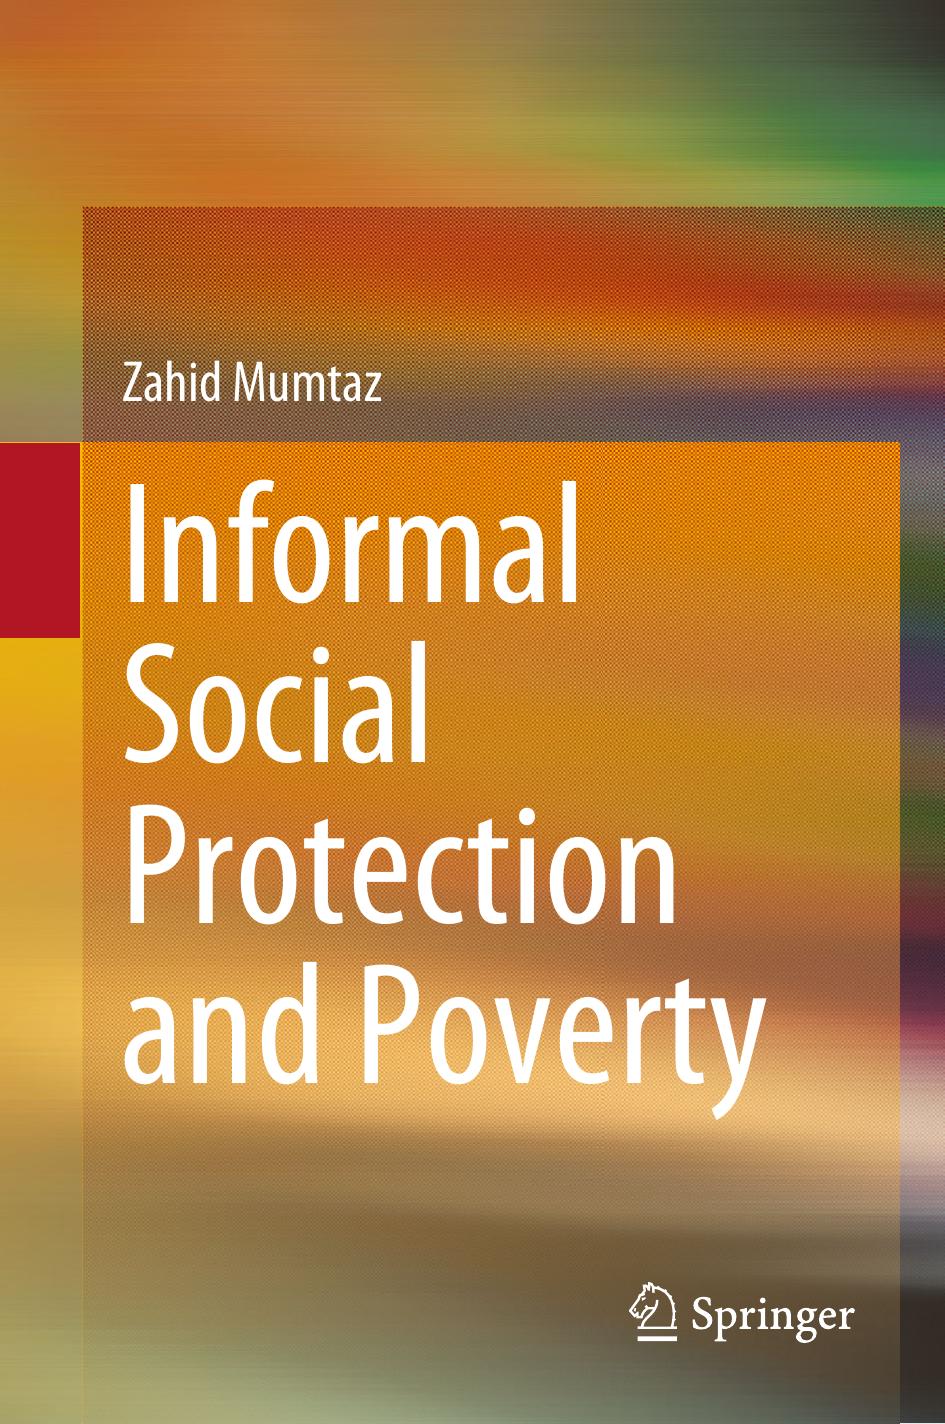 Informal Social Protection and Poverty by Zahid Mumtaz